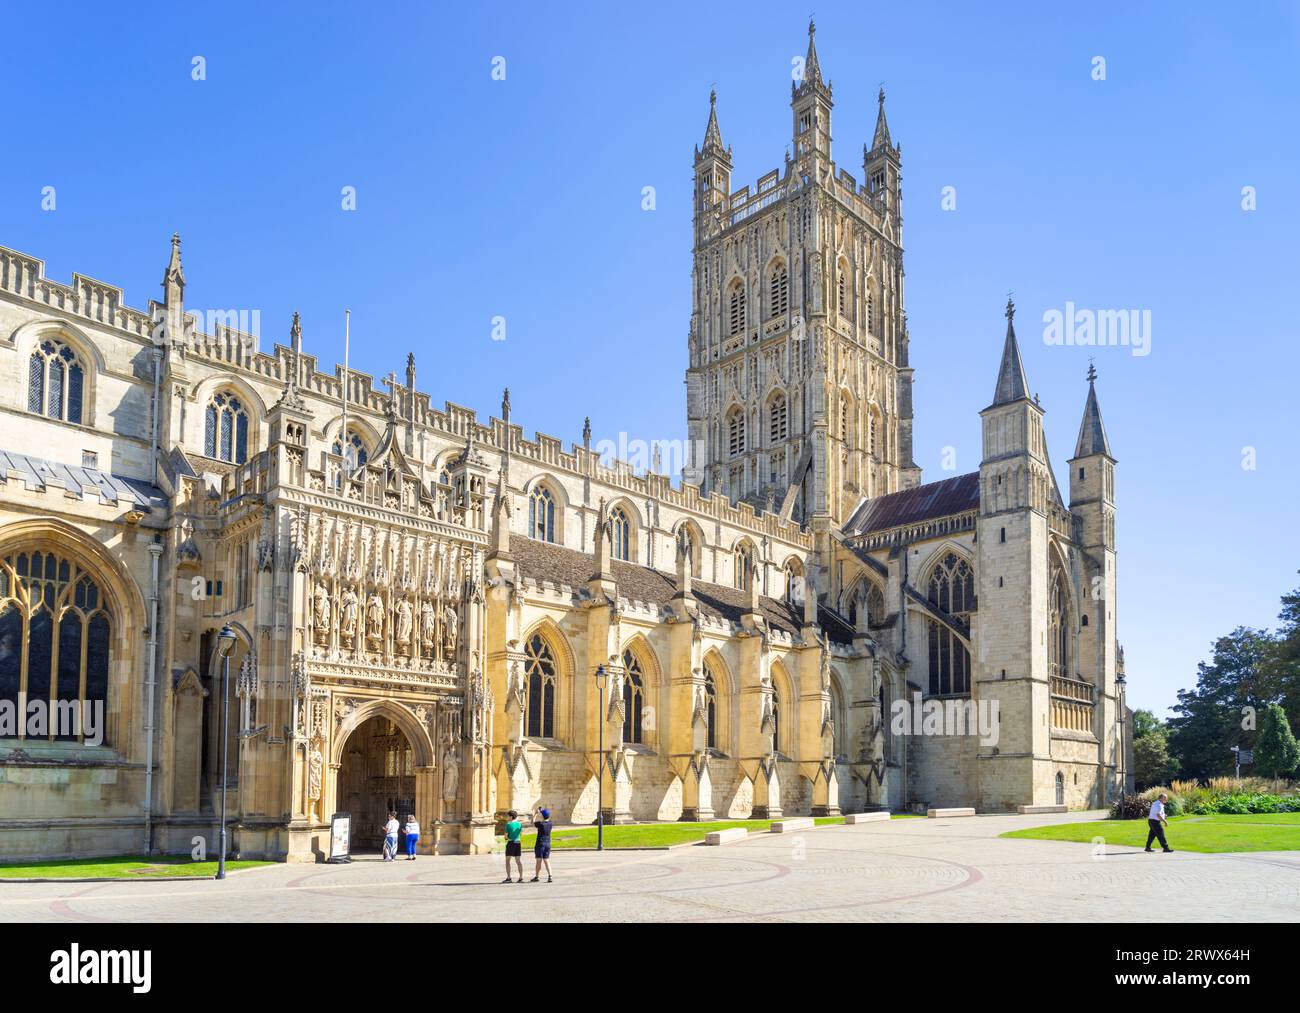 Gloucester cathedral or Cathedral Church of St Peter and the Holy and Indivisible Trinity Gloucester Gloucestershire England UK GB Europe Stock Photo